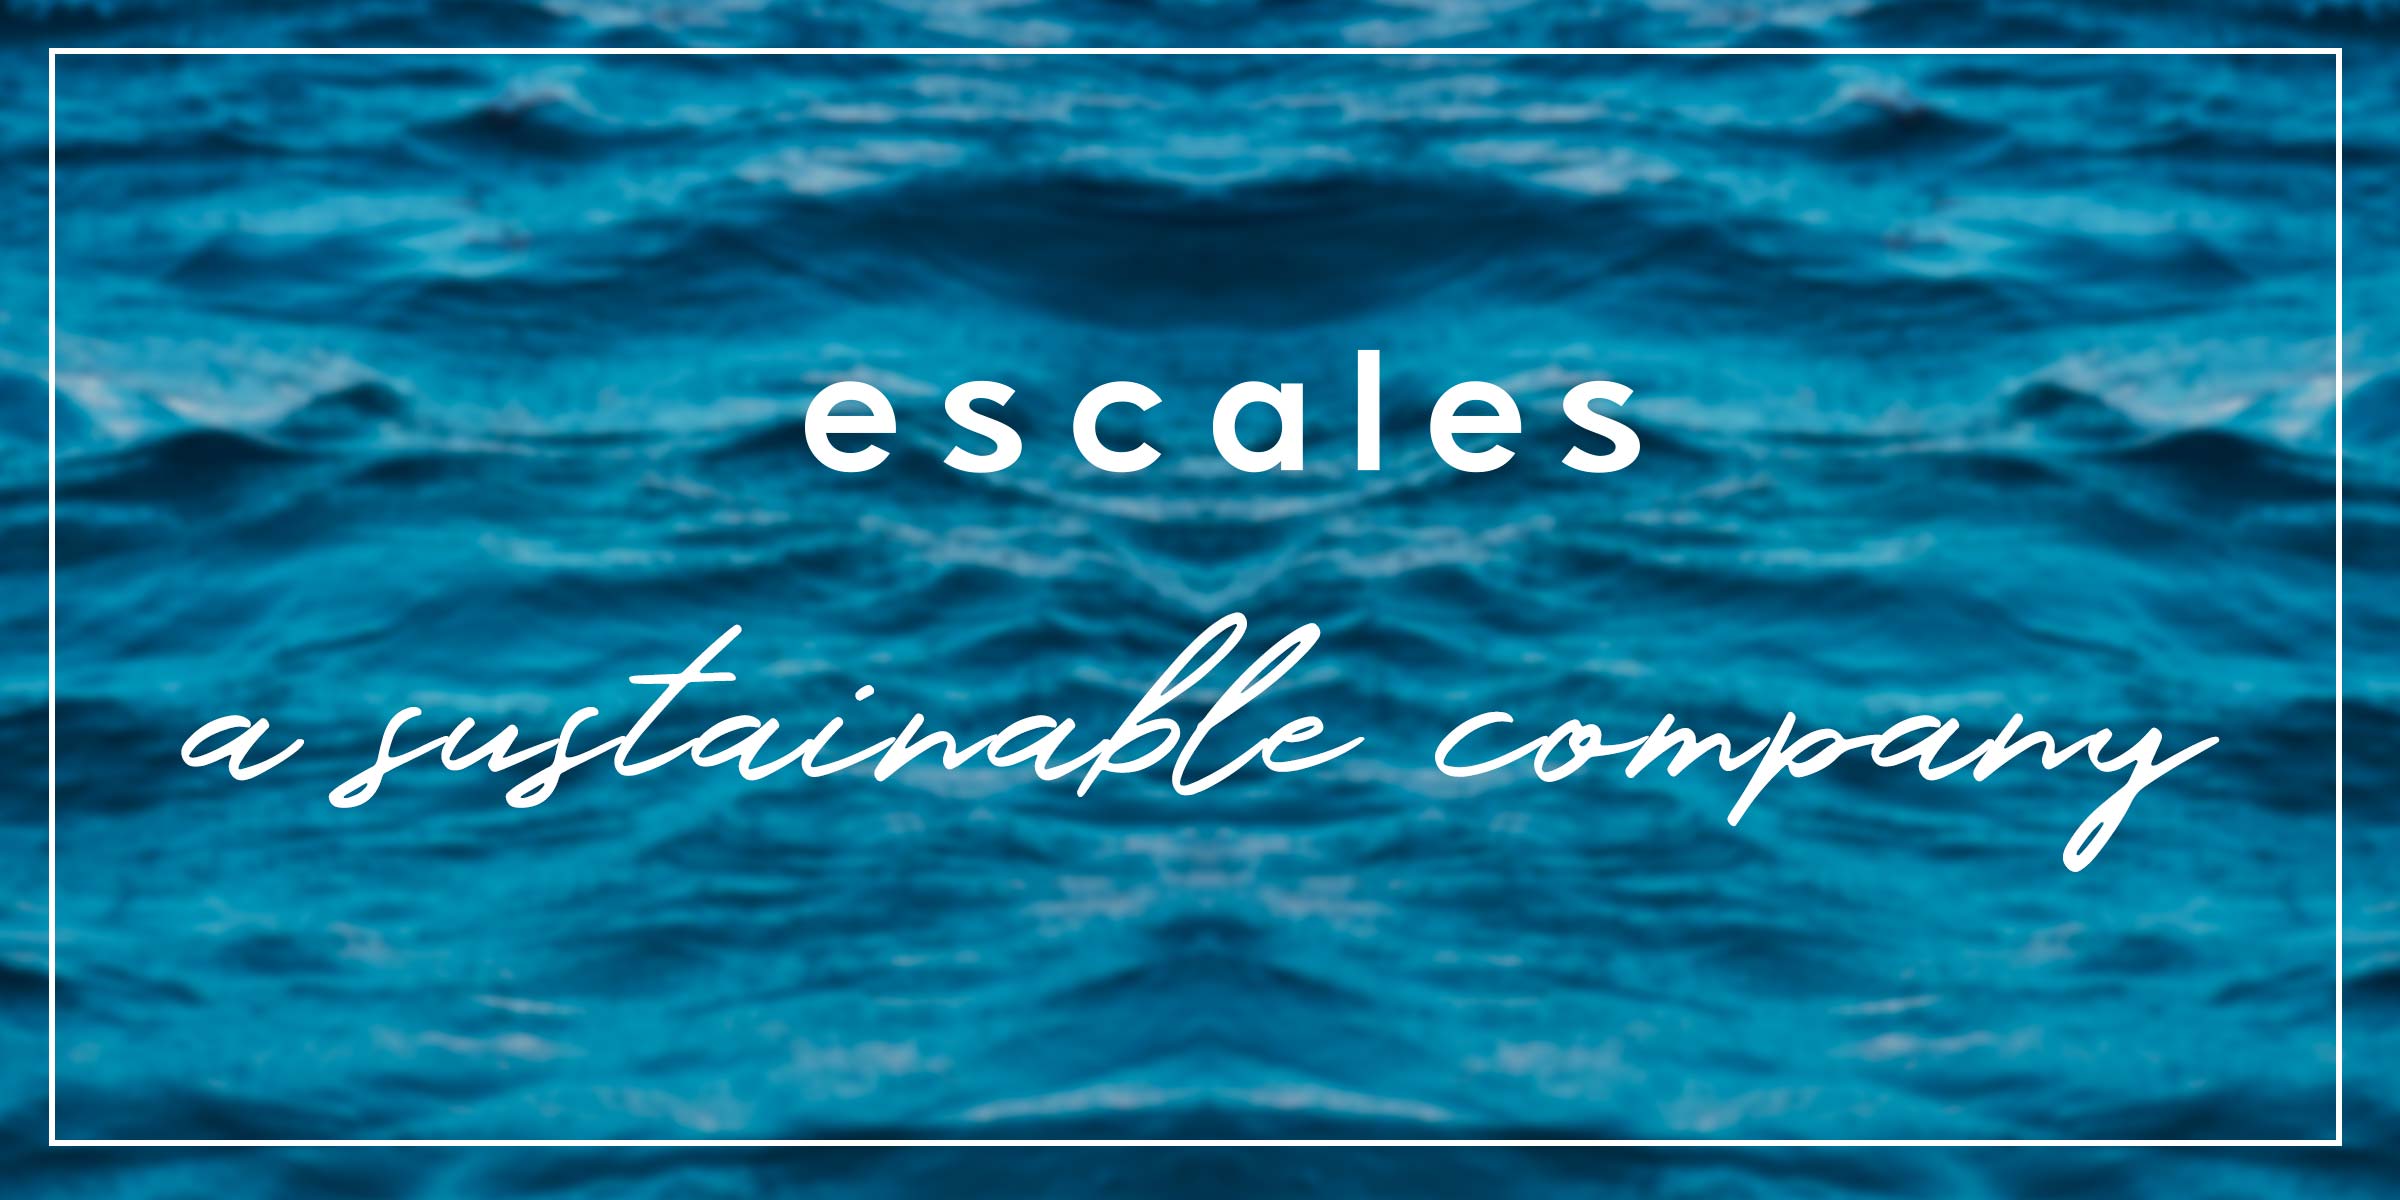 escales, a sustainable company